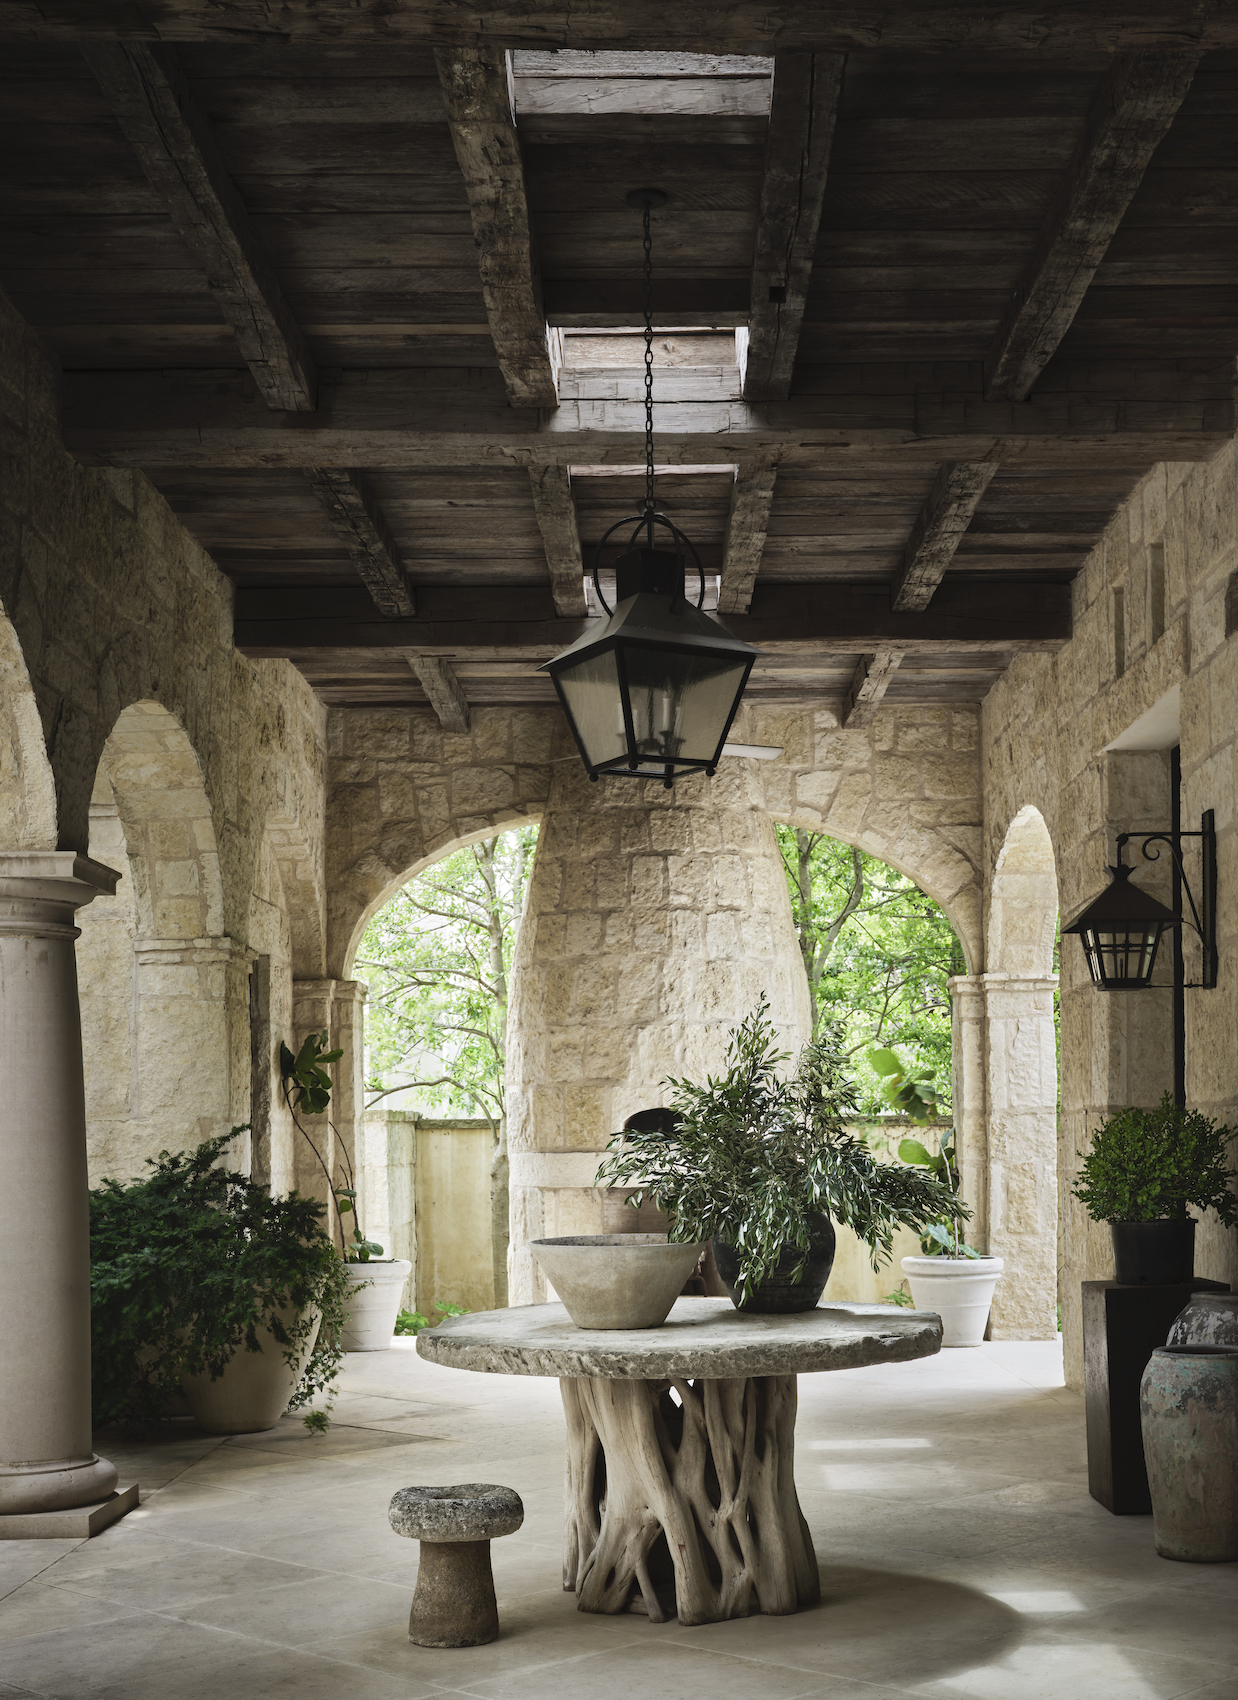 Courtyard of a house interior designed by Chad Dorsey in Effect Magazine